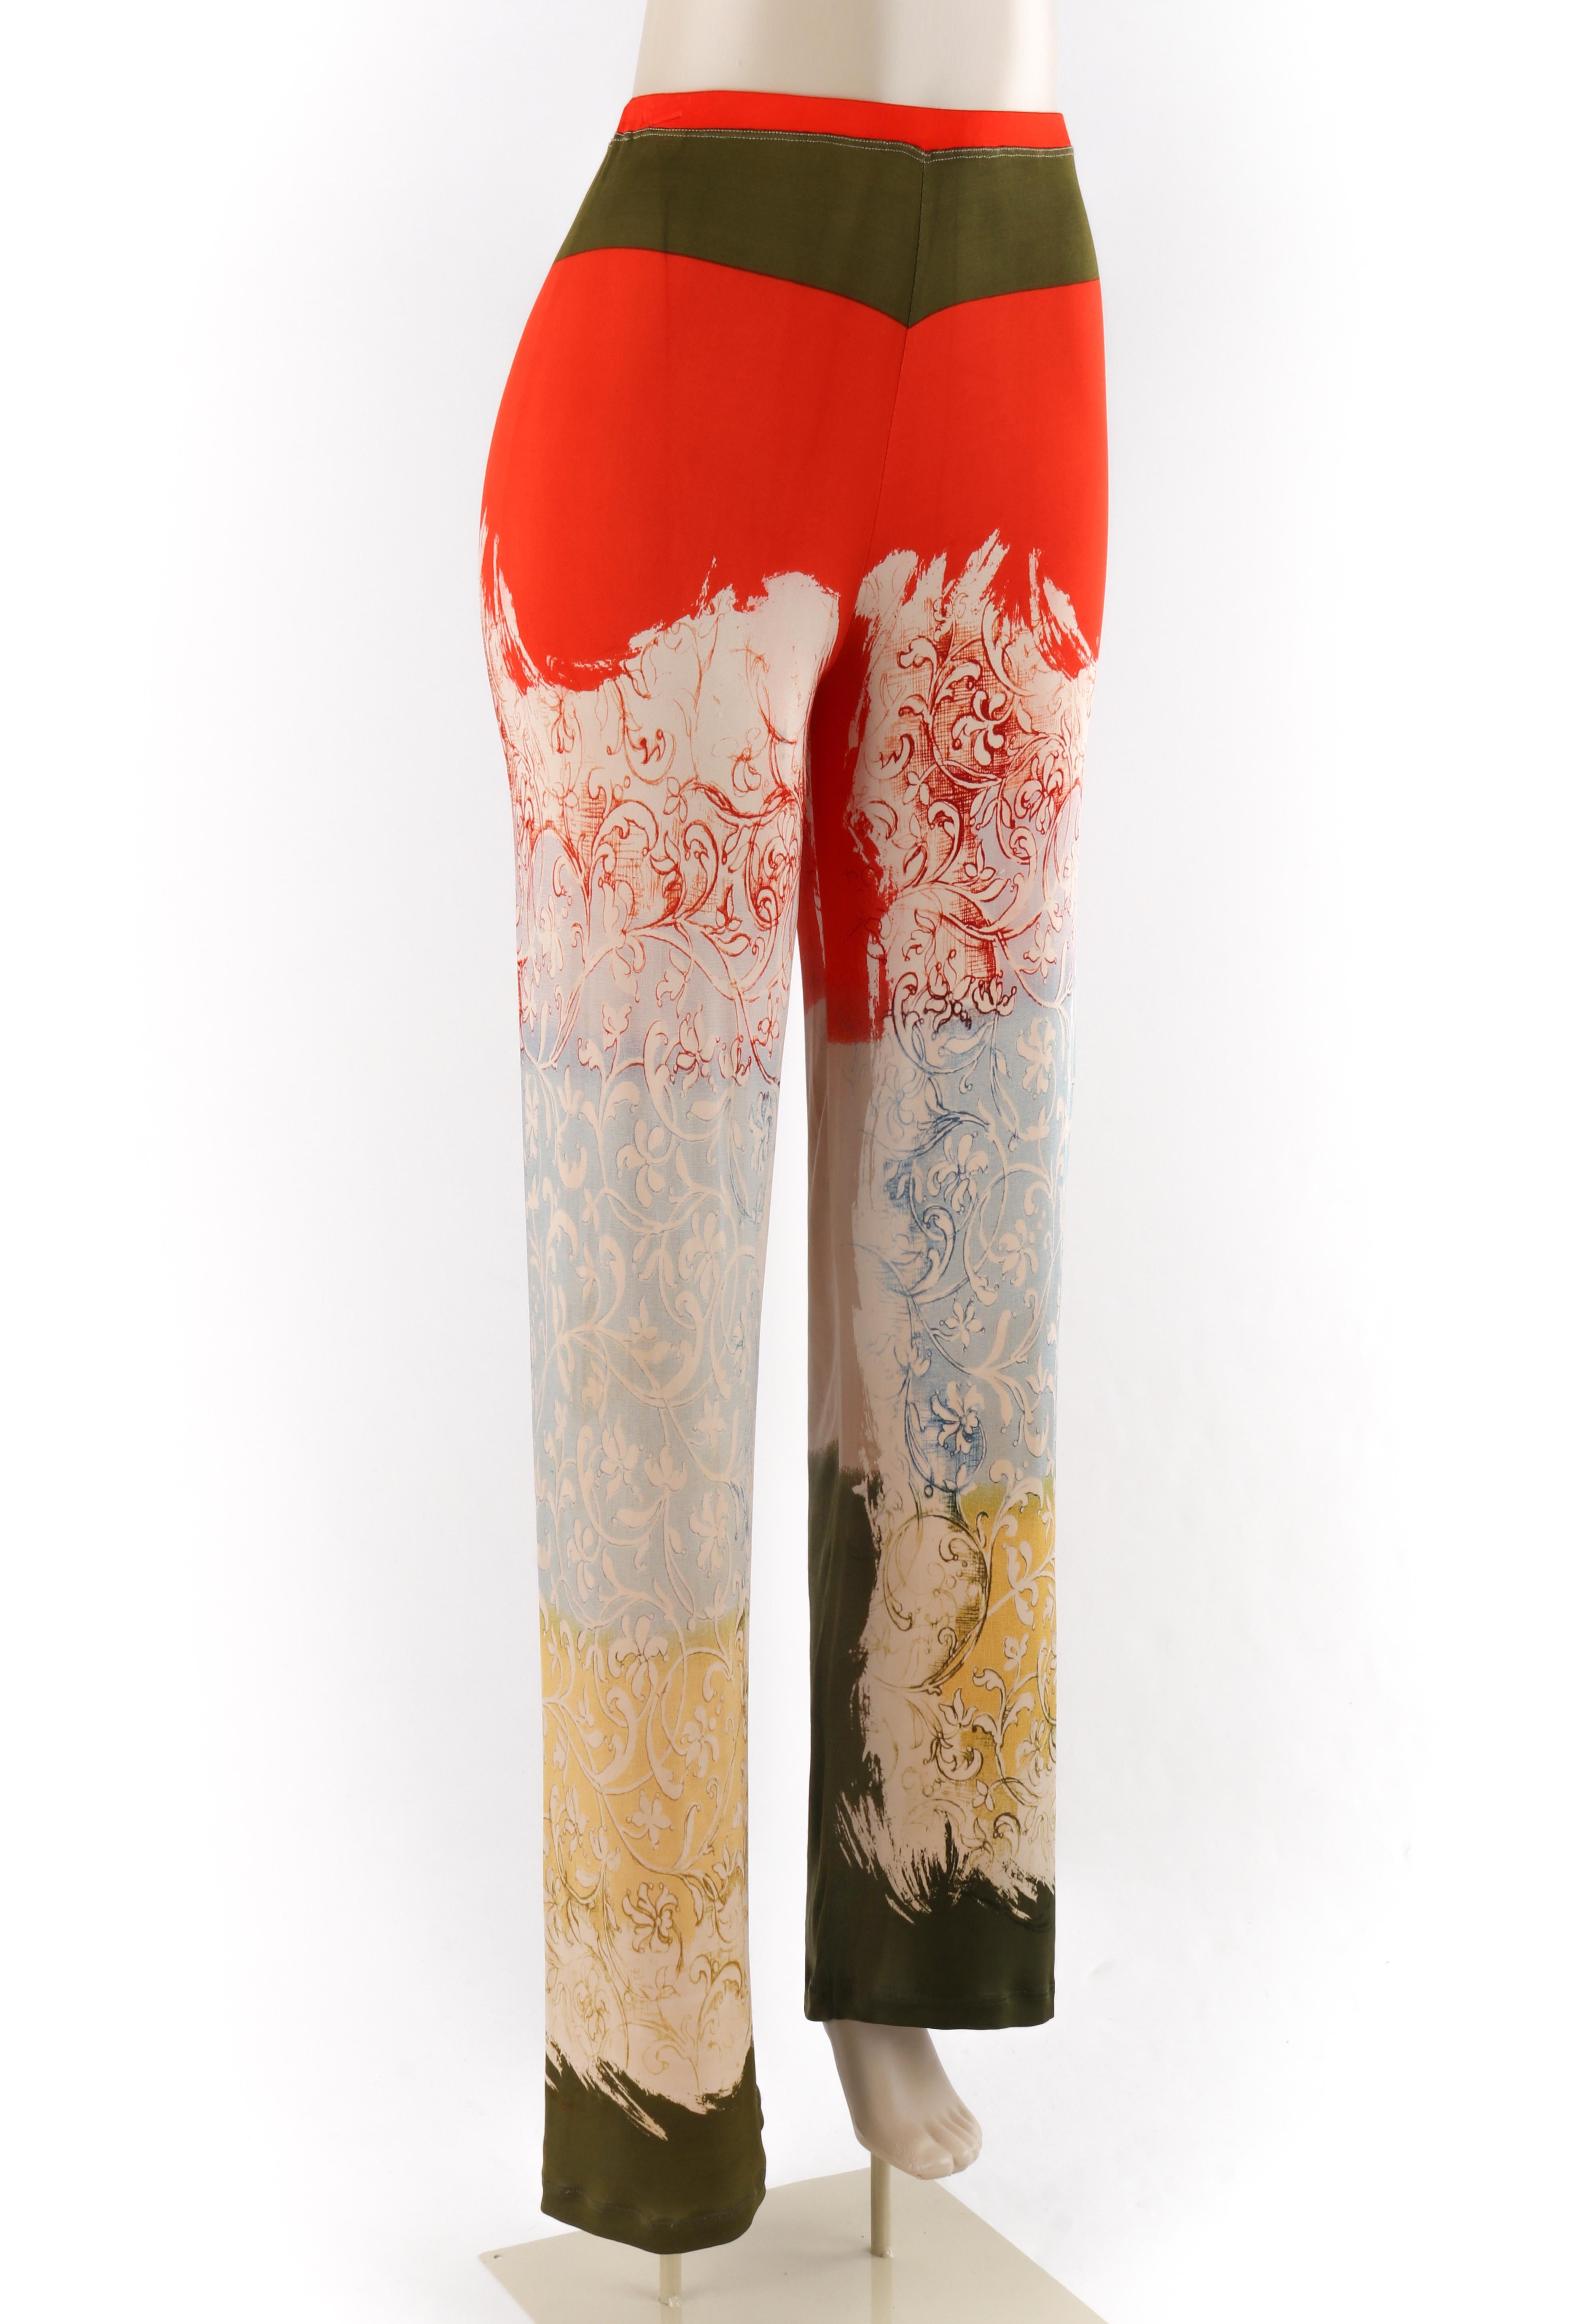 JEAN PAUL GAULTIER Maille c.1990’s Multicolor White Floral Print Straight Leg Pants
Circa: c.1990’s 
Label(s): Jean-Paul Gaultier Maille
Designer: Jean Paul Gaultier
Style: Wide leg pants
Color(s): Shades of orange, blue, green, yellow, gray, and